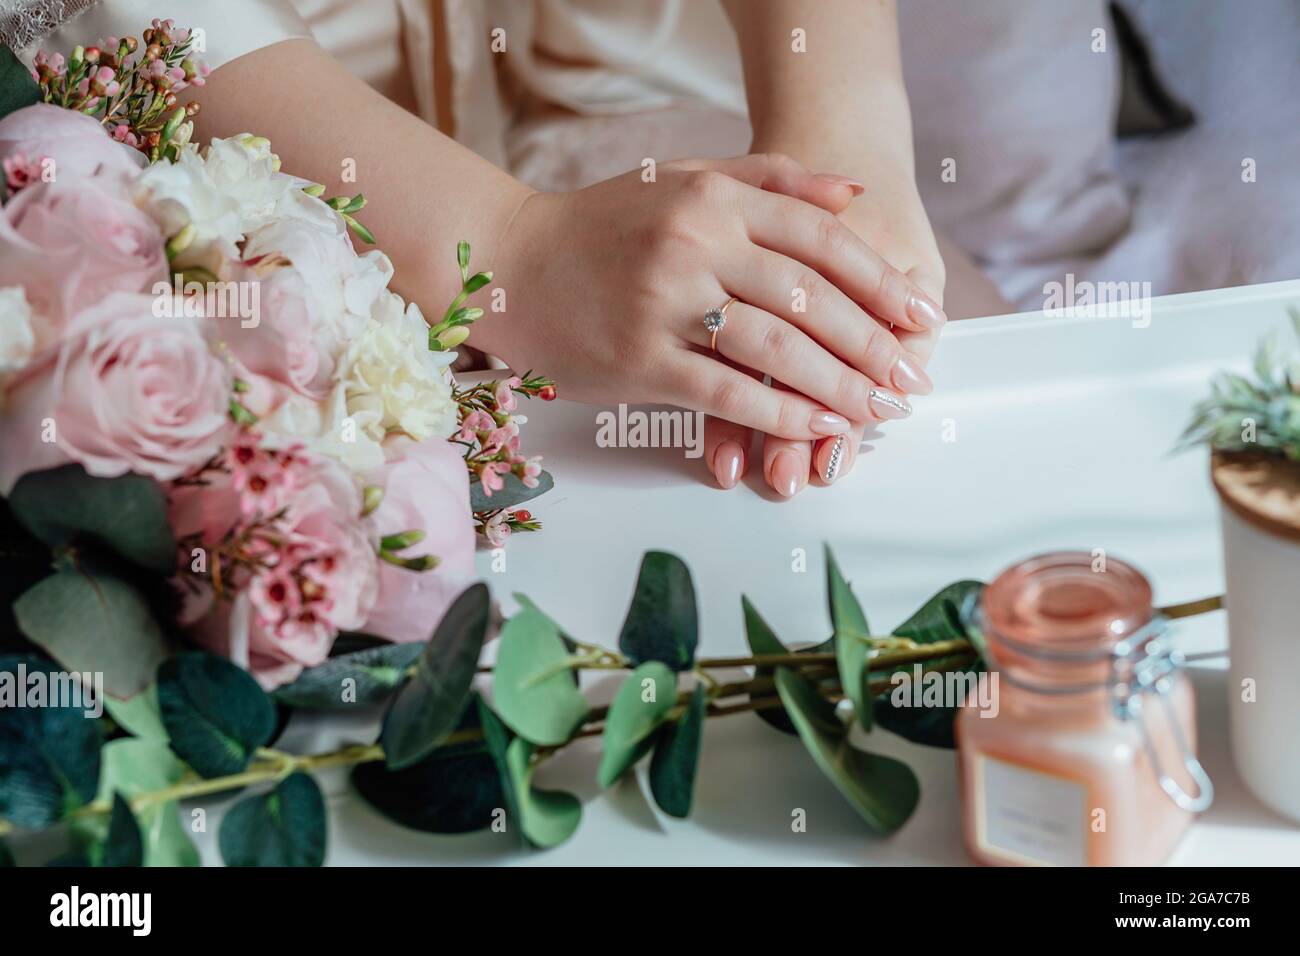 Picture of man and woman with bridal bouquet .Young married couple holding hands, ceremony wedding day. Newly wed couple's hands with wedding rings. Stock Photo